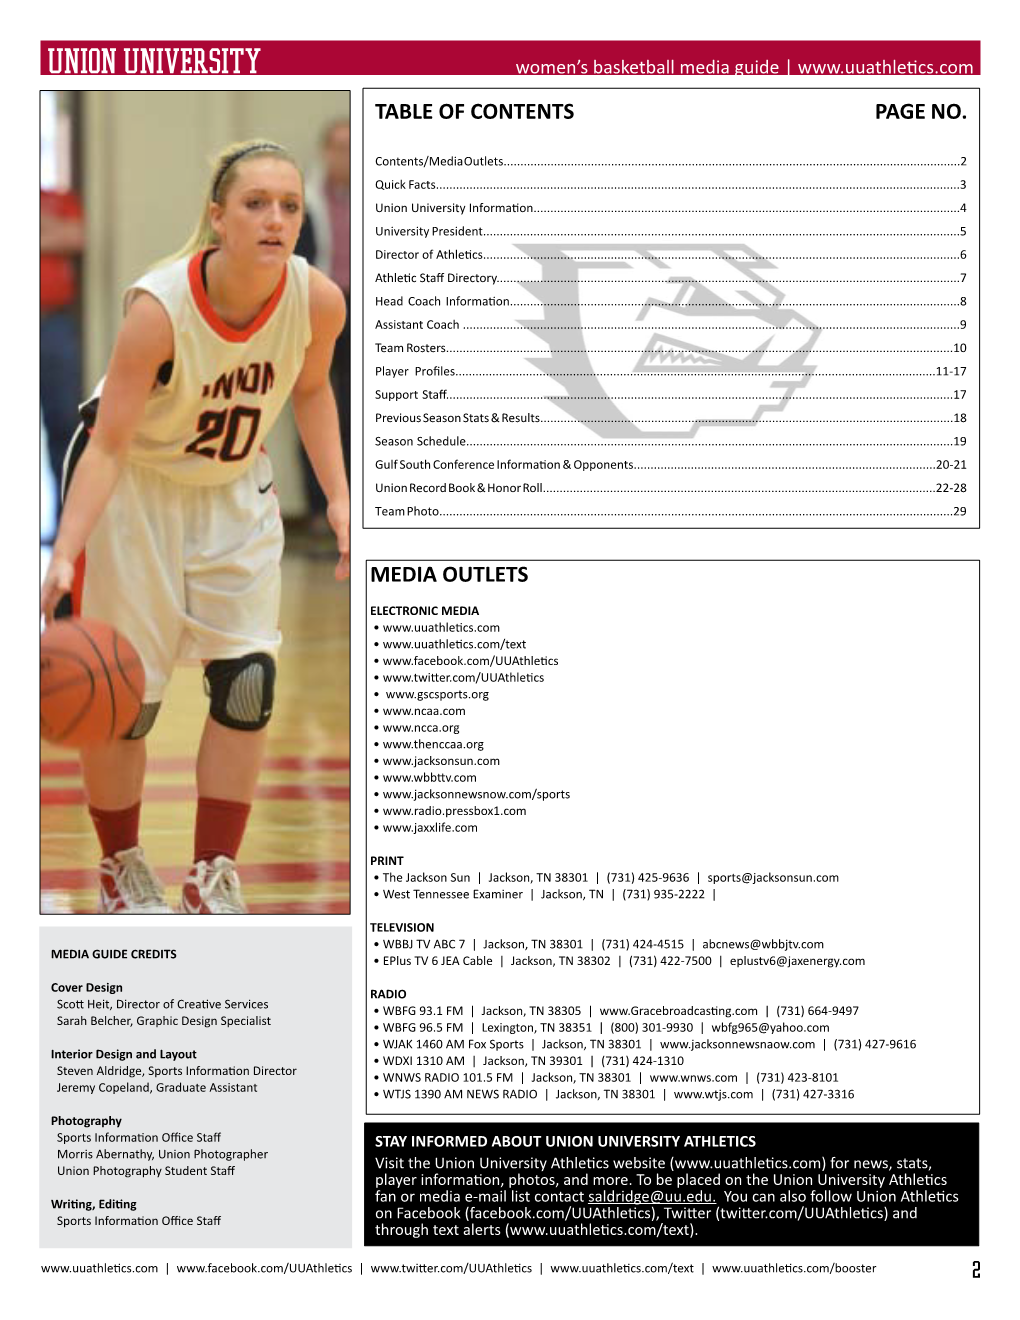 UNION UNIVERSITY Women’S Basketball Media Guide | TABLE of CONTENTS PAGE NO